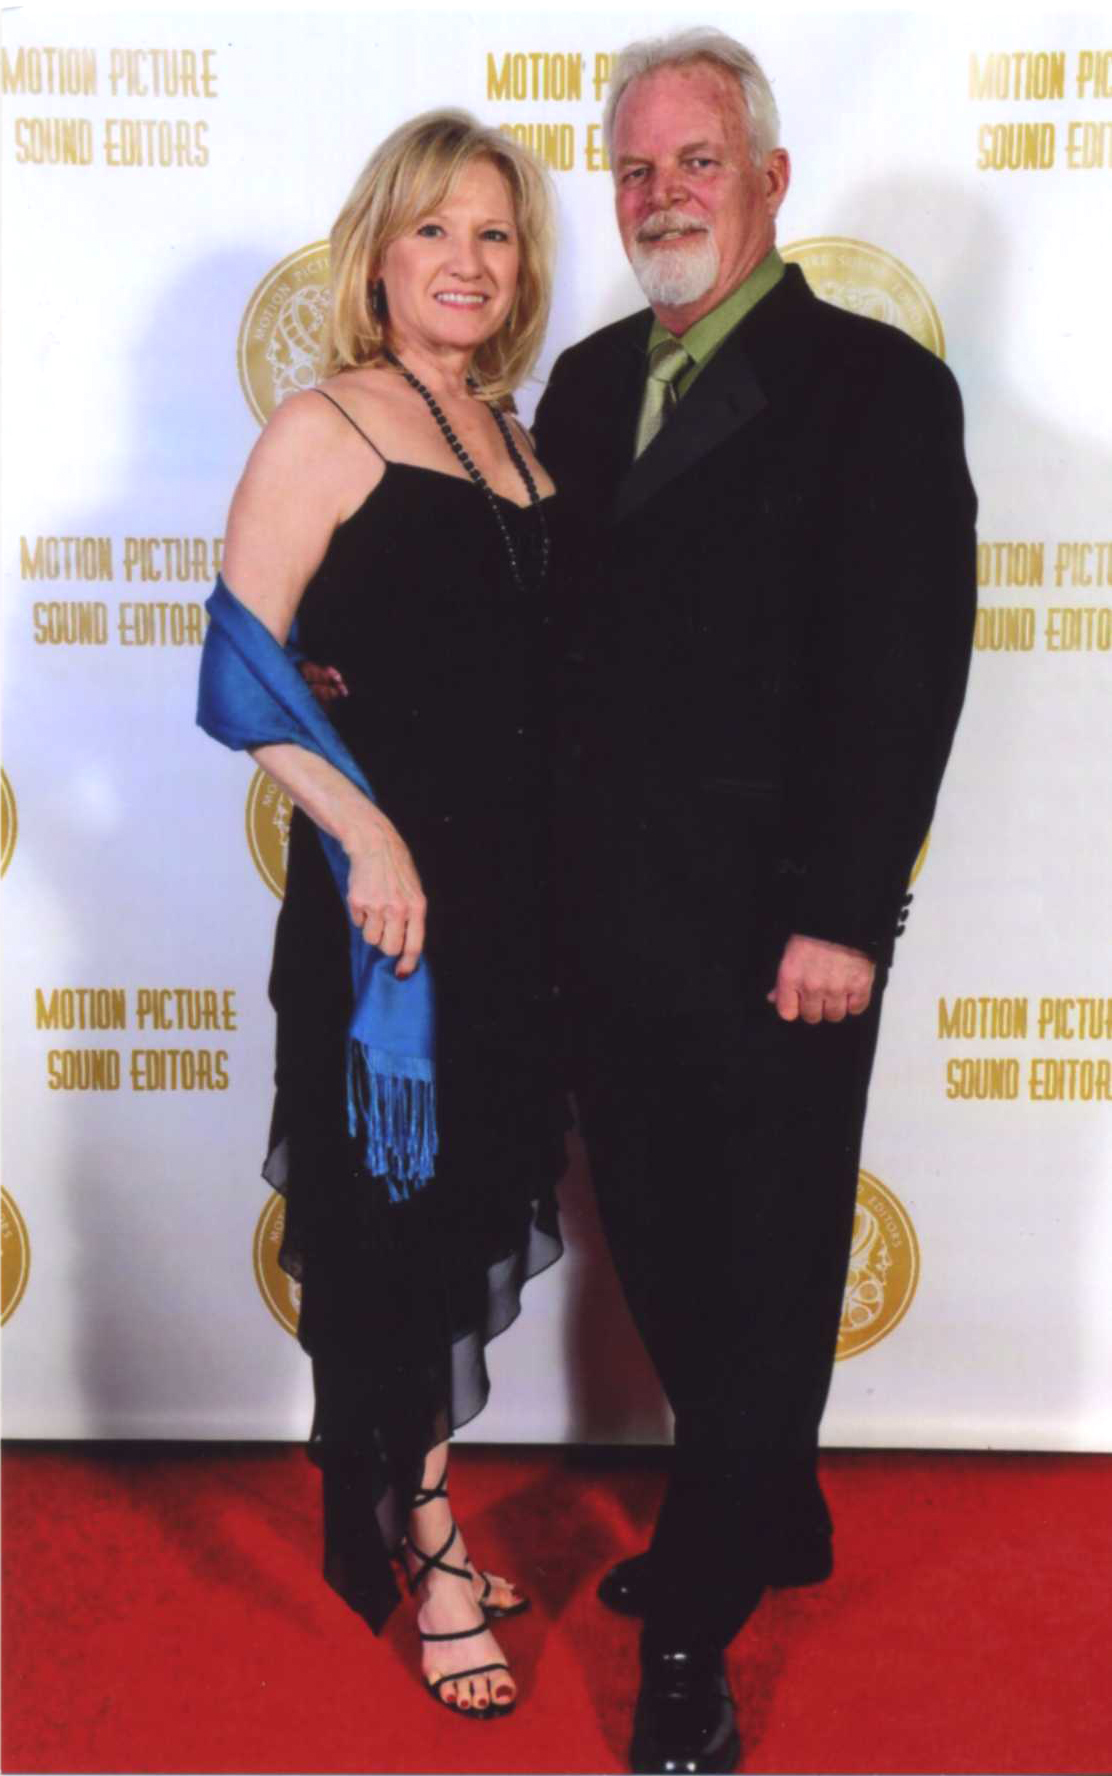 Richard and wife Kathy - 2010 MPSE Golden Reel Awards